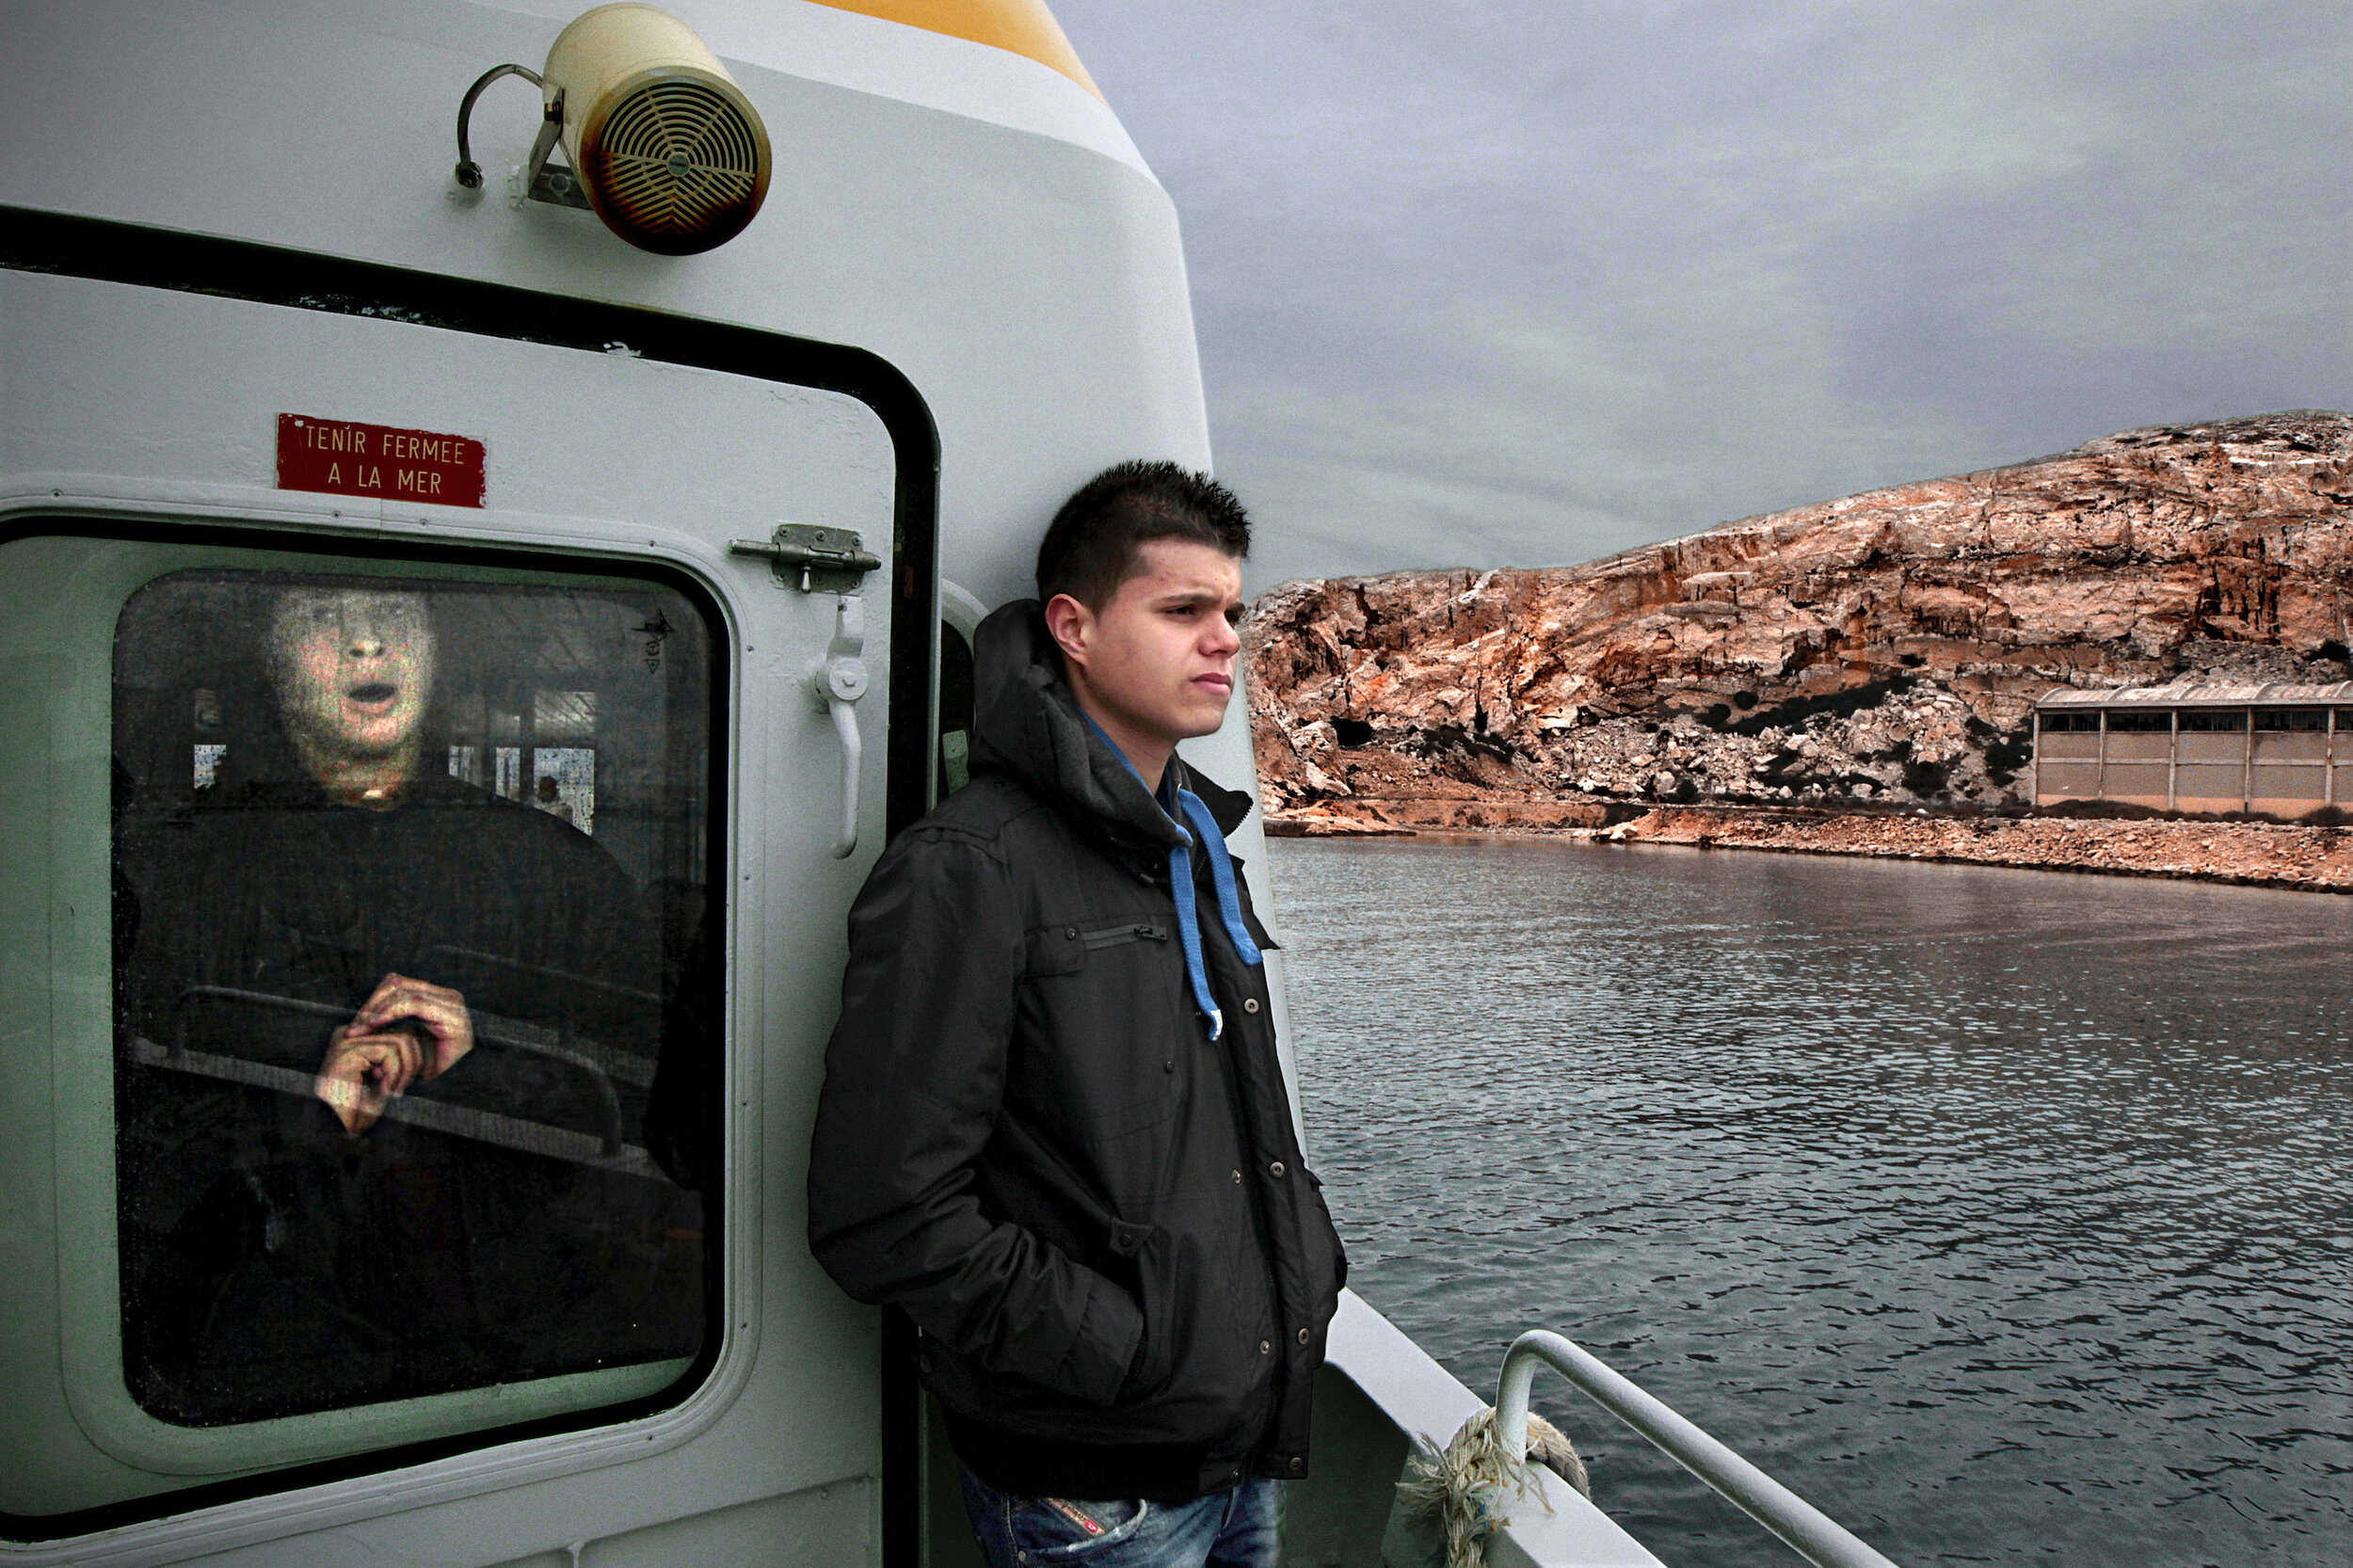   France. Marseille. 2013. Omar Farhoune [right], 17, travels to Frioul Islands, a tourist destination located approximately 4 km from Marseille. Omar arrived in Marseille in early 2013 from Barcelona, Spain, with his father. Due to the economic cris